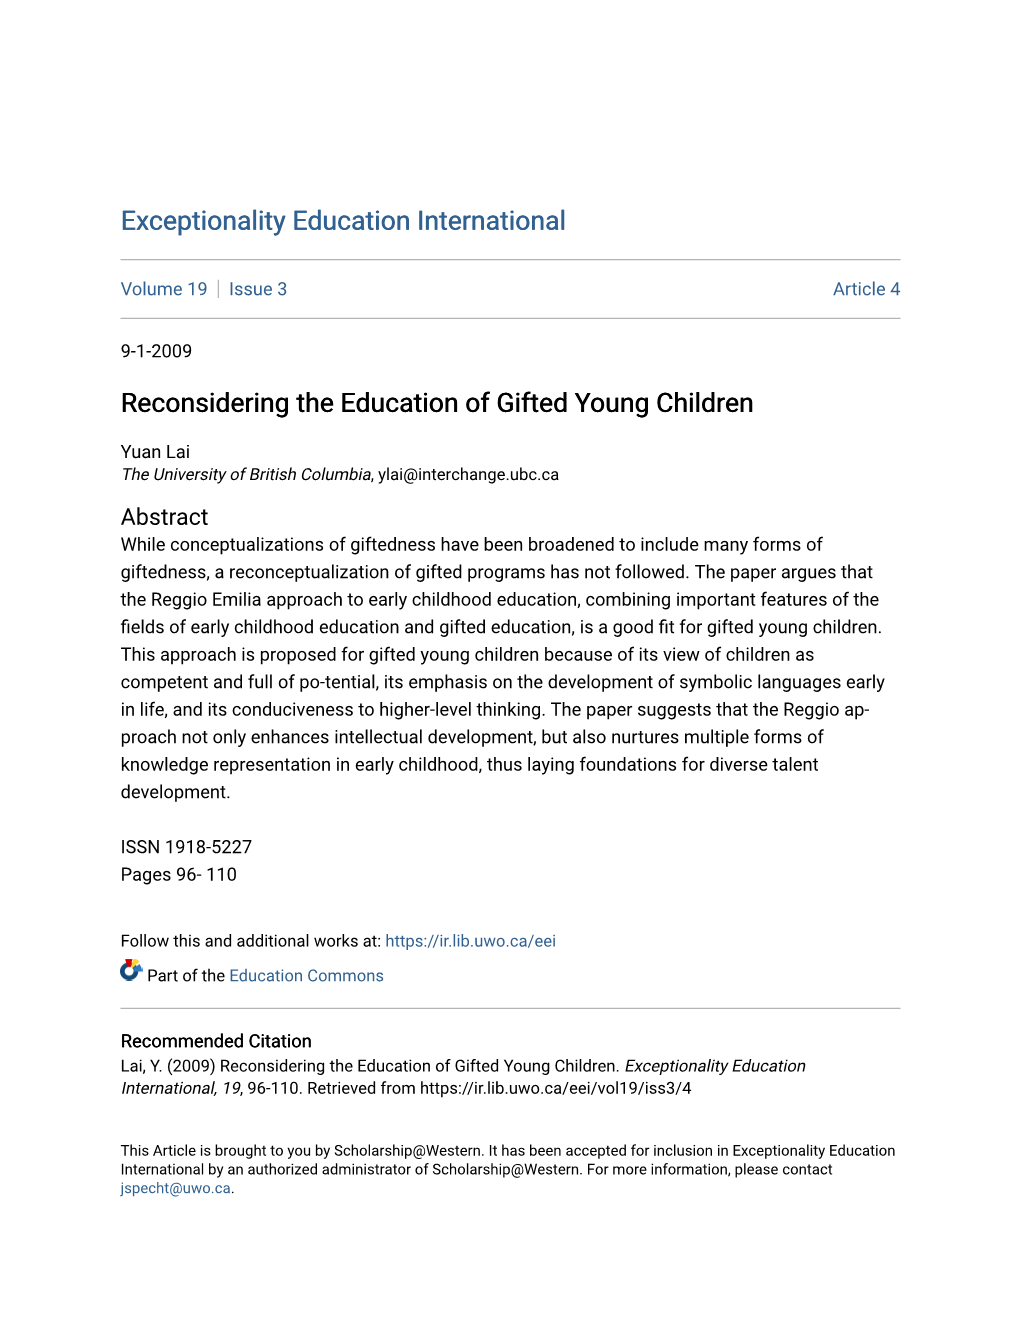 Reconsidering the Education of Gifted Young Children